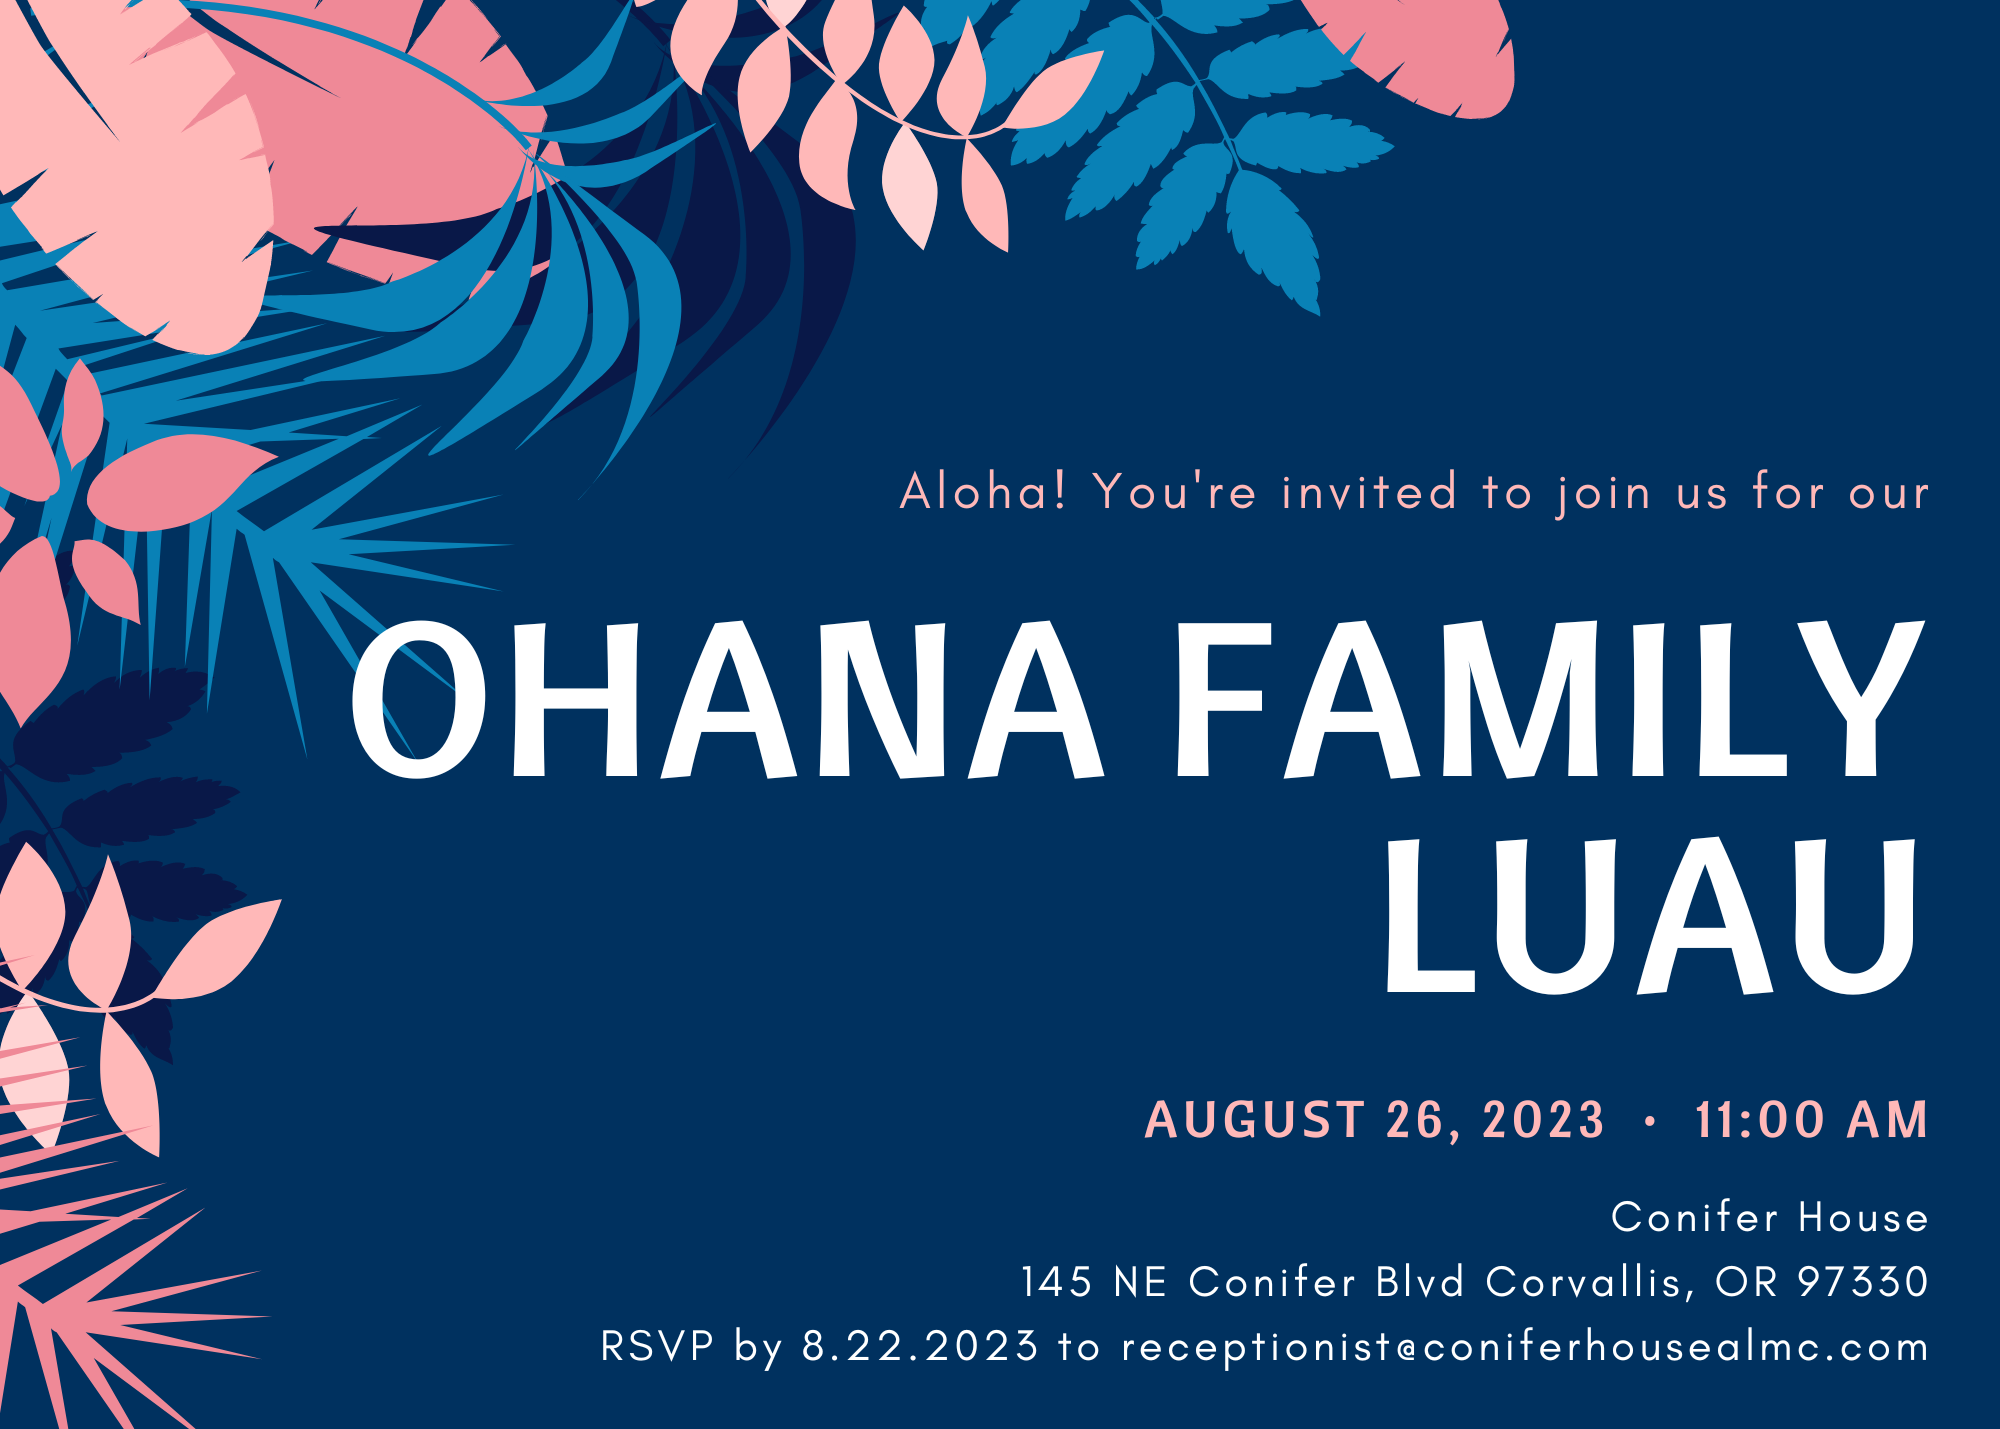 Invite to conifer house for an upcoming luau on august 26 family is welcome, call for details